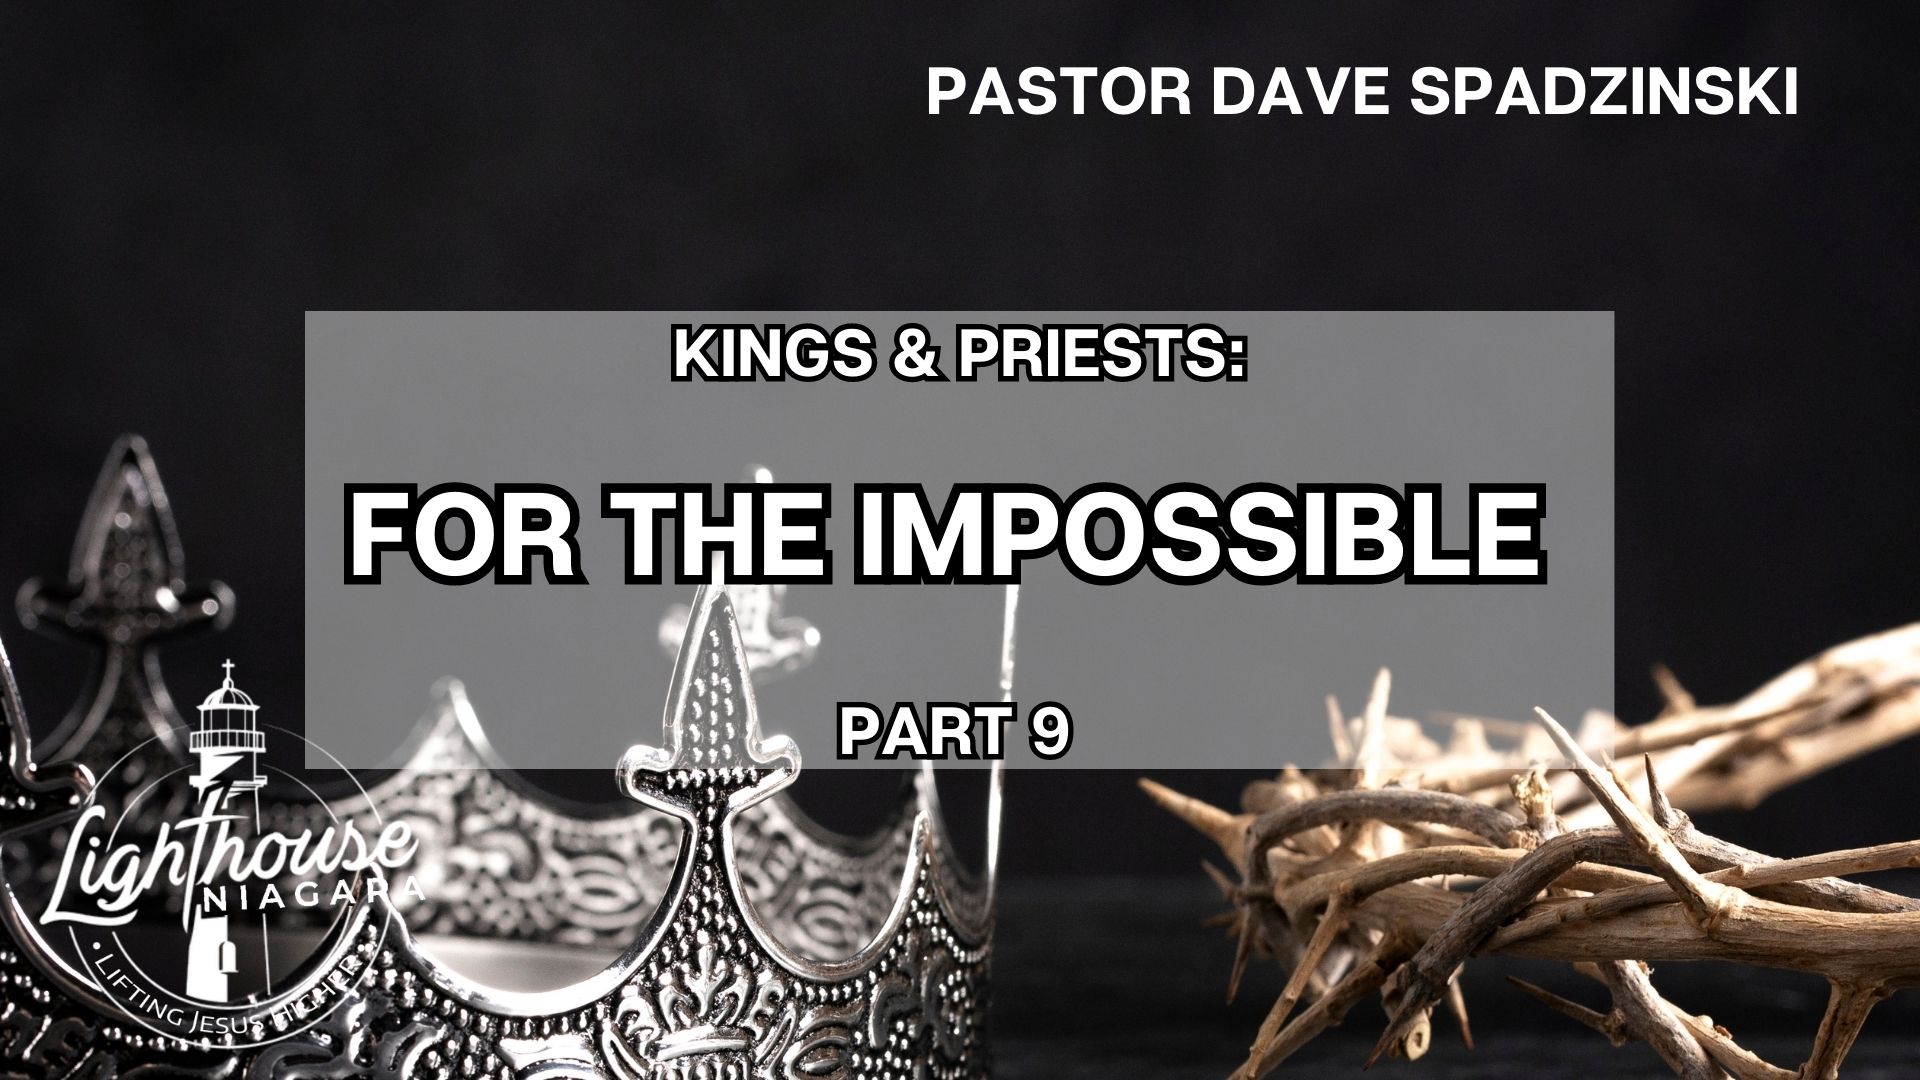 Kings & Priests: For the Impossible - Pastor Dave Spadzinski